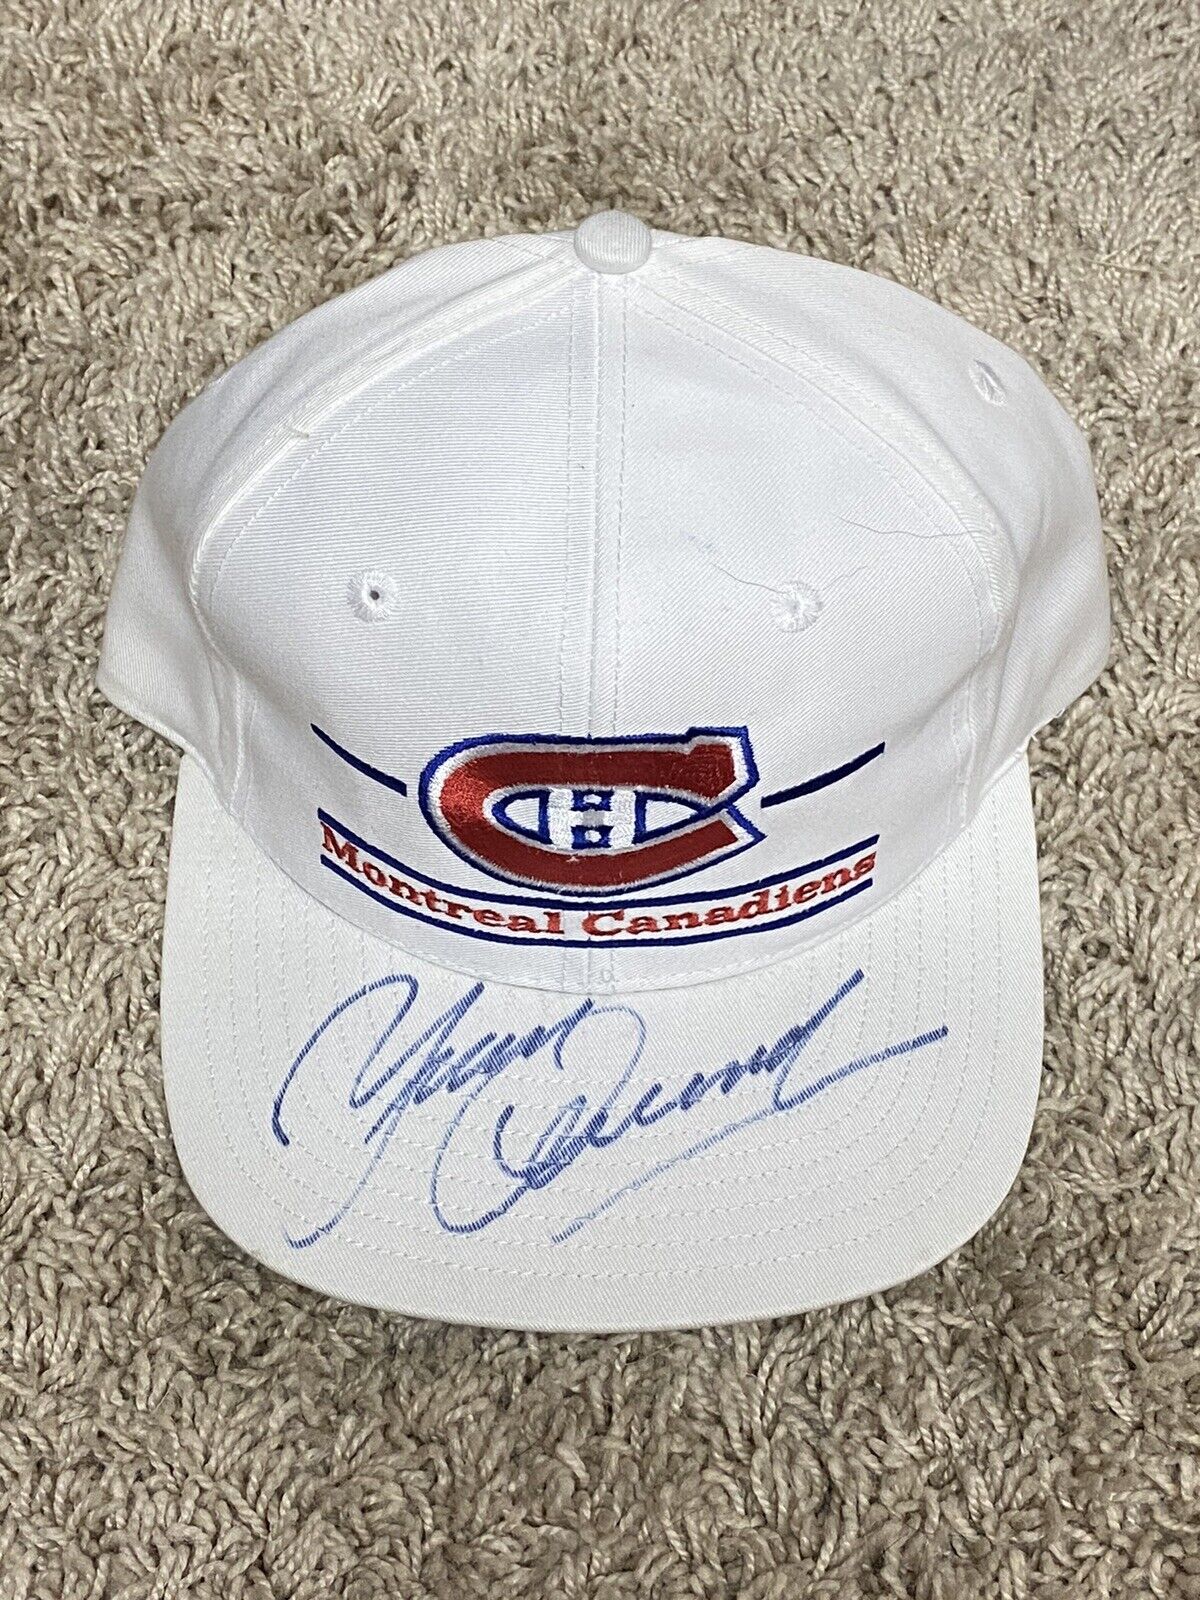 Yvan Cournoyer Signed Autographed Montreal Canadians Hat Jsa Coa * Rare Item *